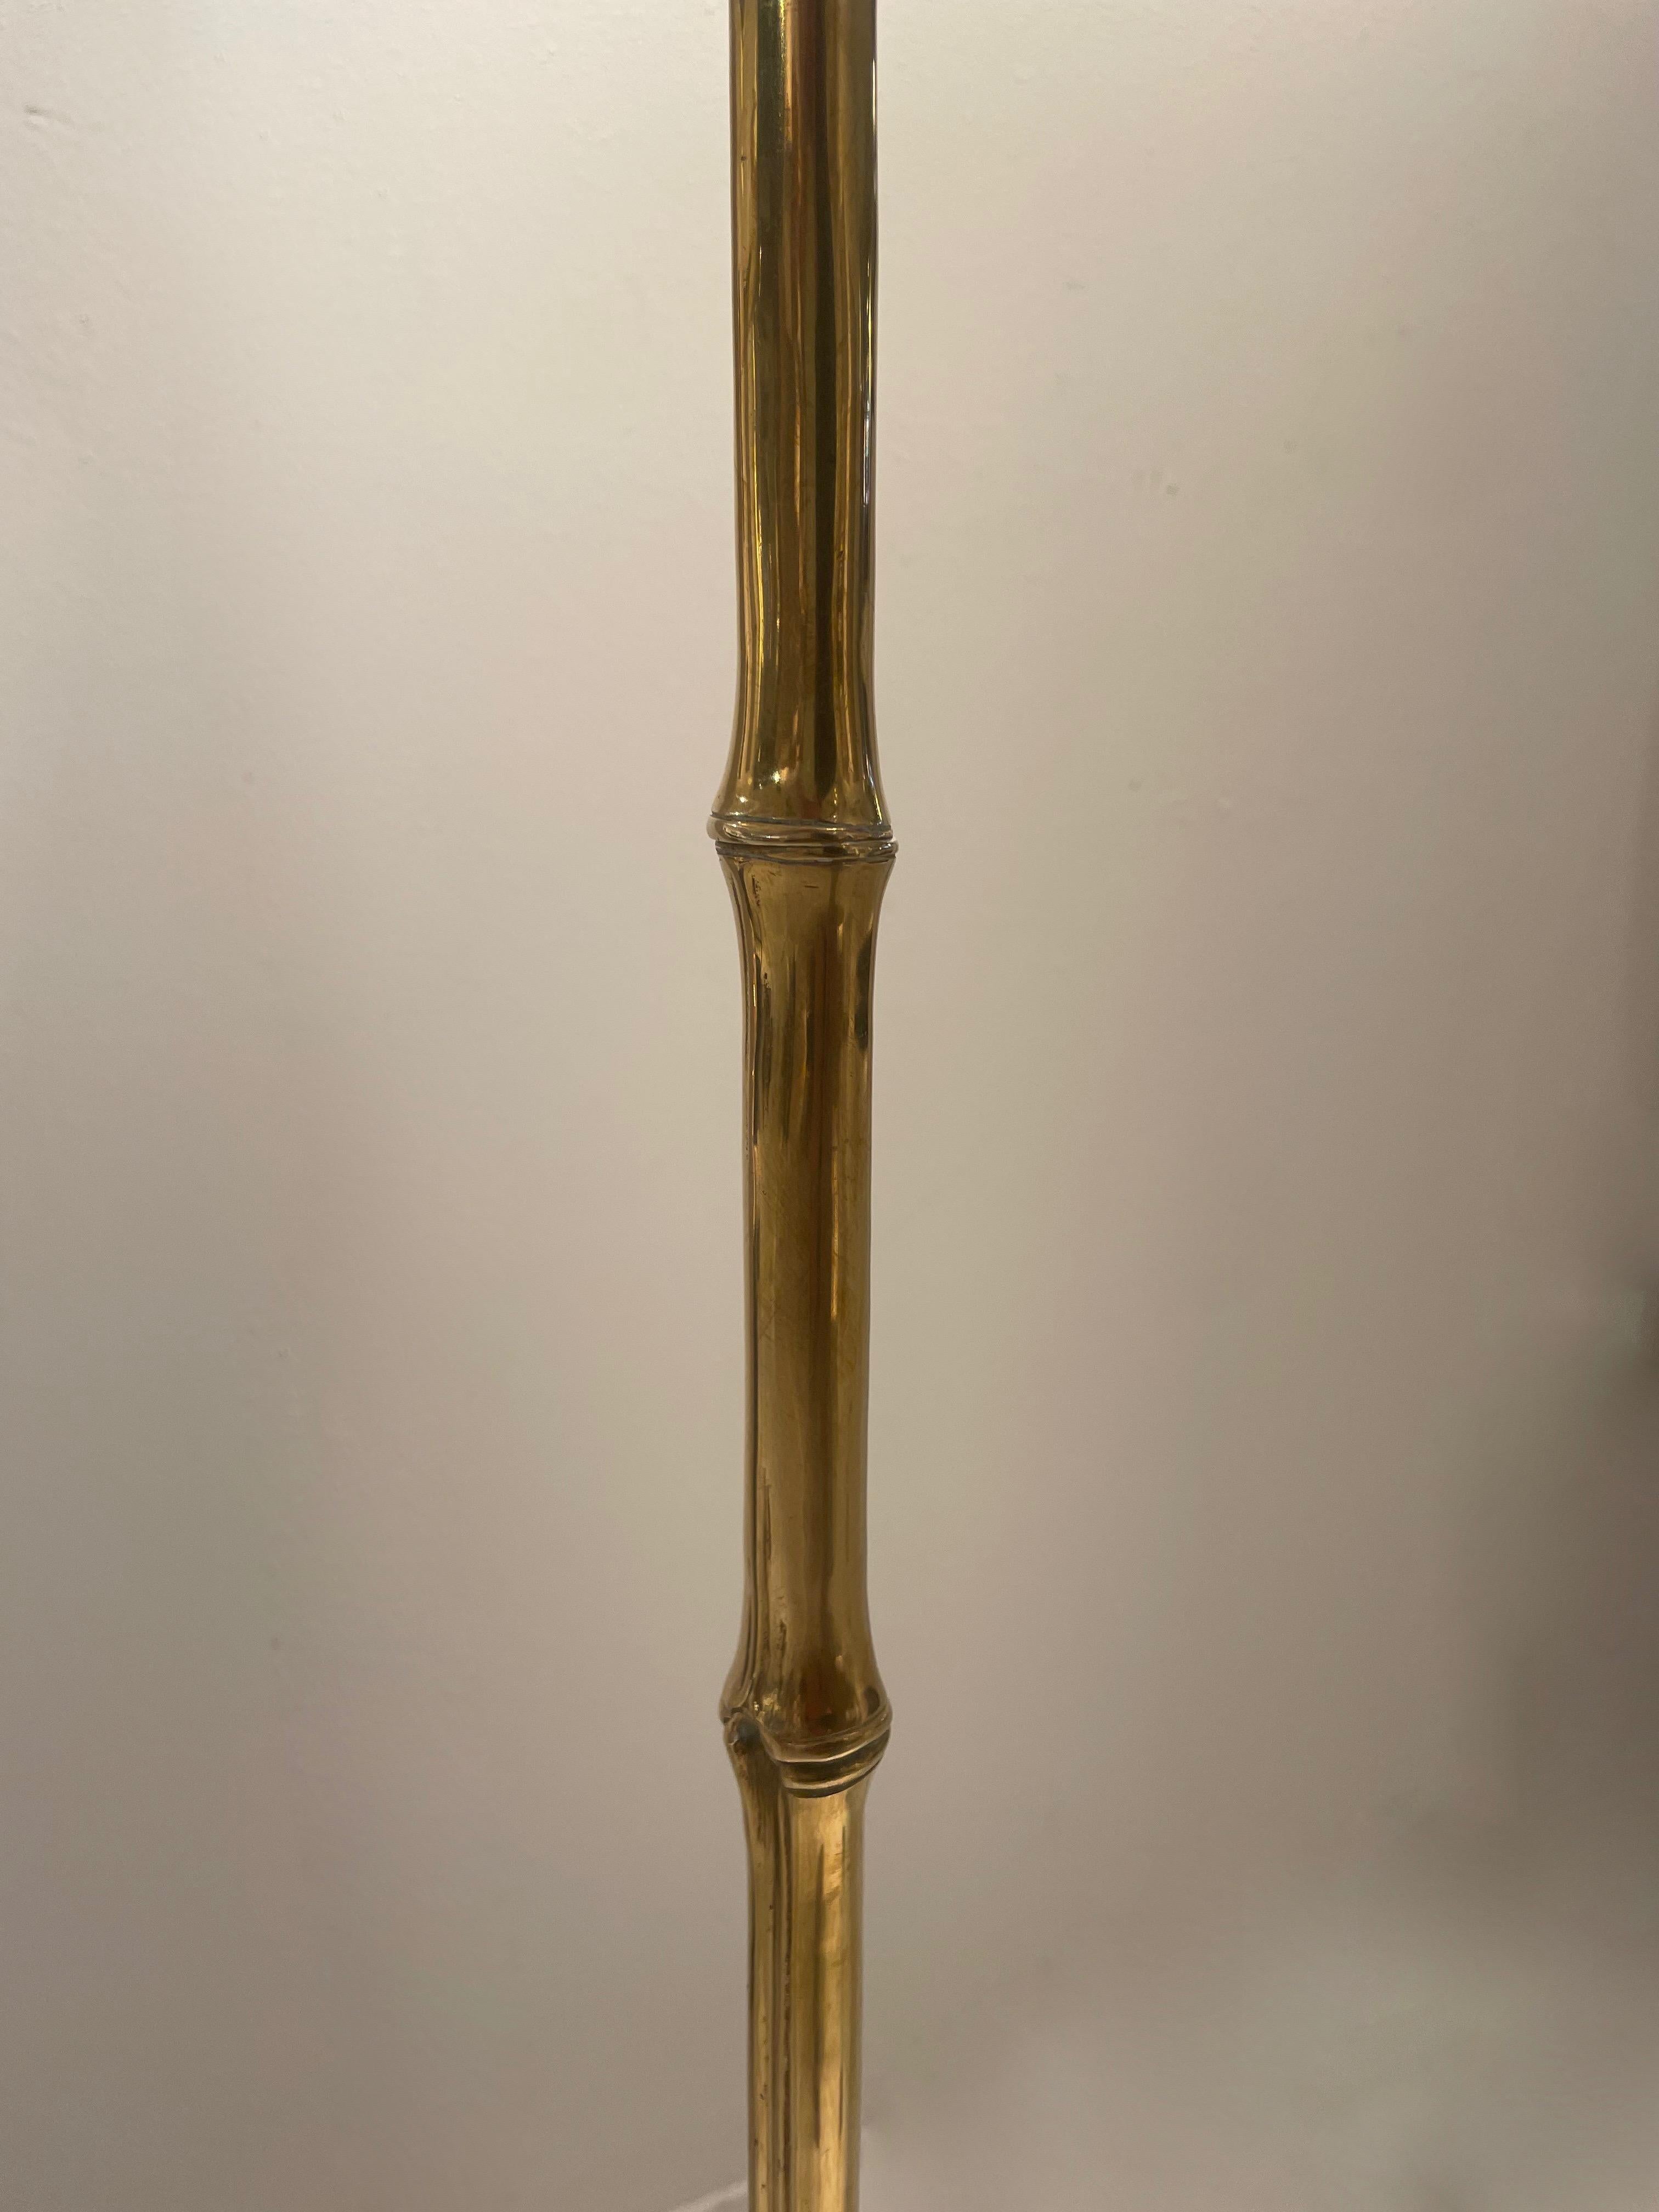 Anodized Faux Bamboo Brass Floor Lamp with A Lotus Flower on Top by Maison Baguès, France For Sale